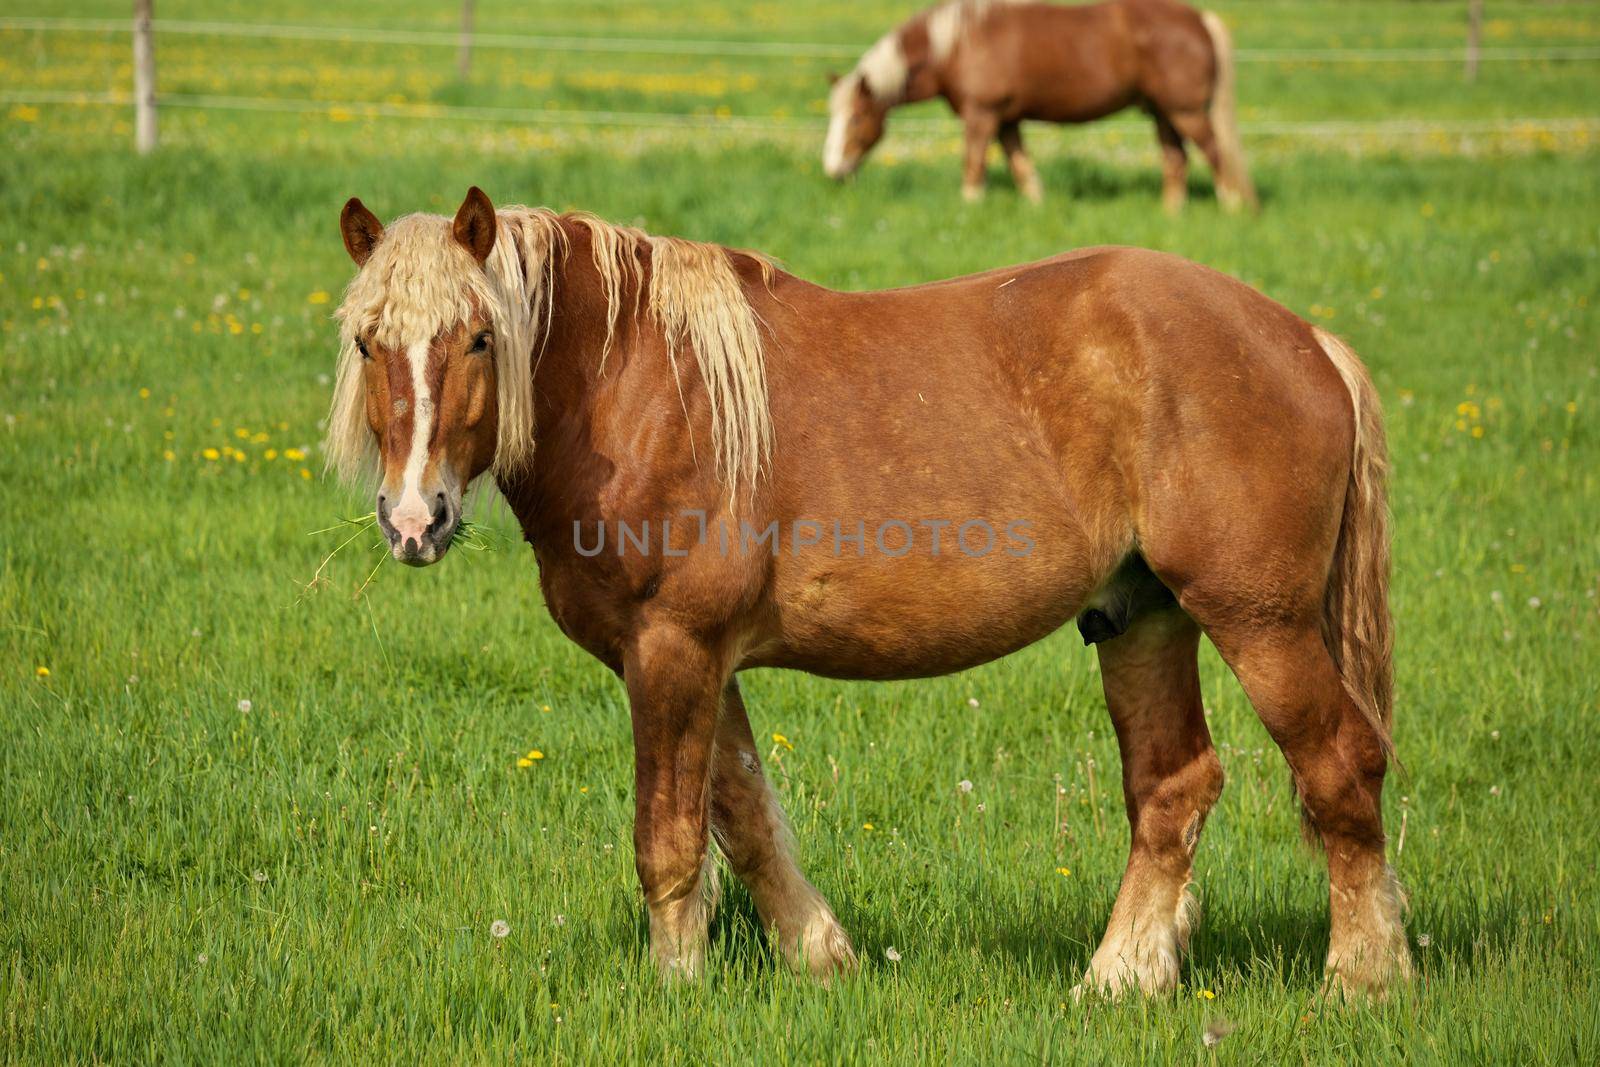 A Male Flaxen Chestnut Horse Stallion Colt Looks Up Towards Camera While Grazing in Pasture by markvandam